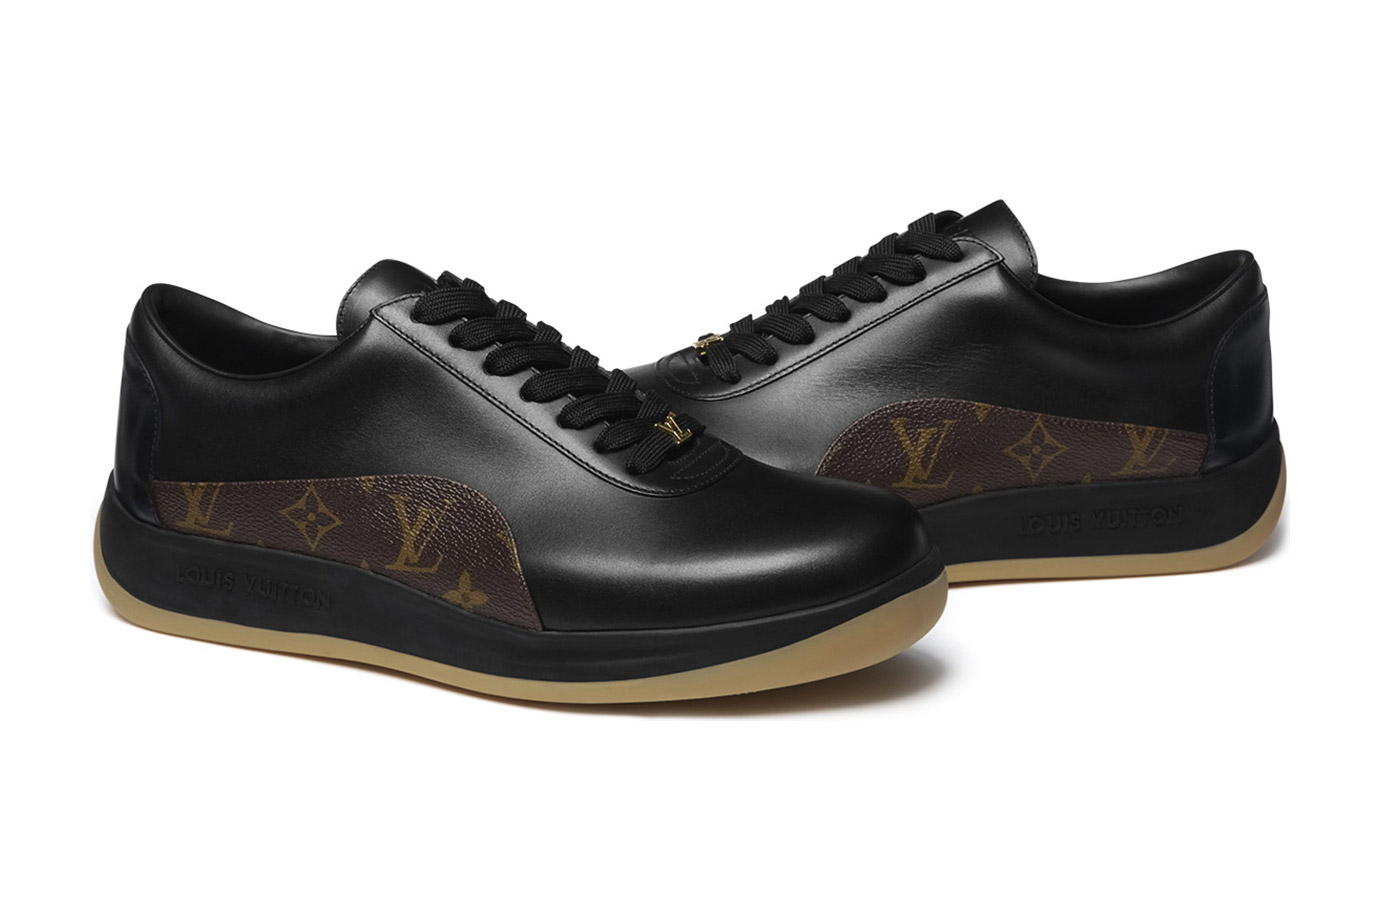 Supreme X Louis Vuitton: First Look at the Collection [PHOTOS] – WWD